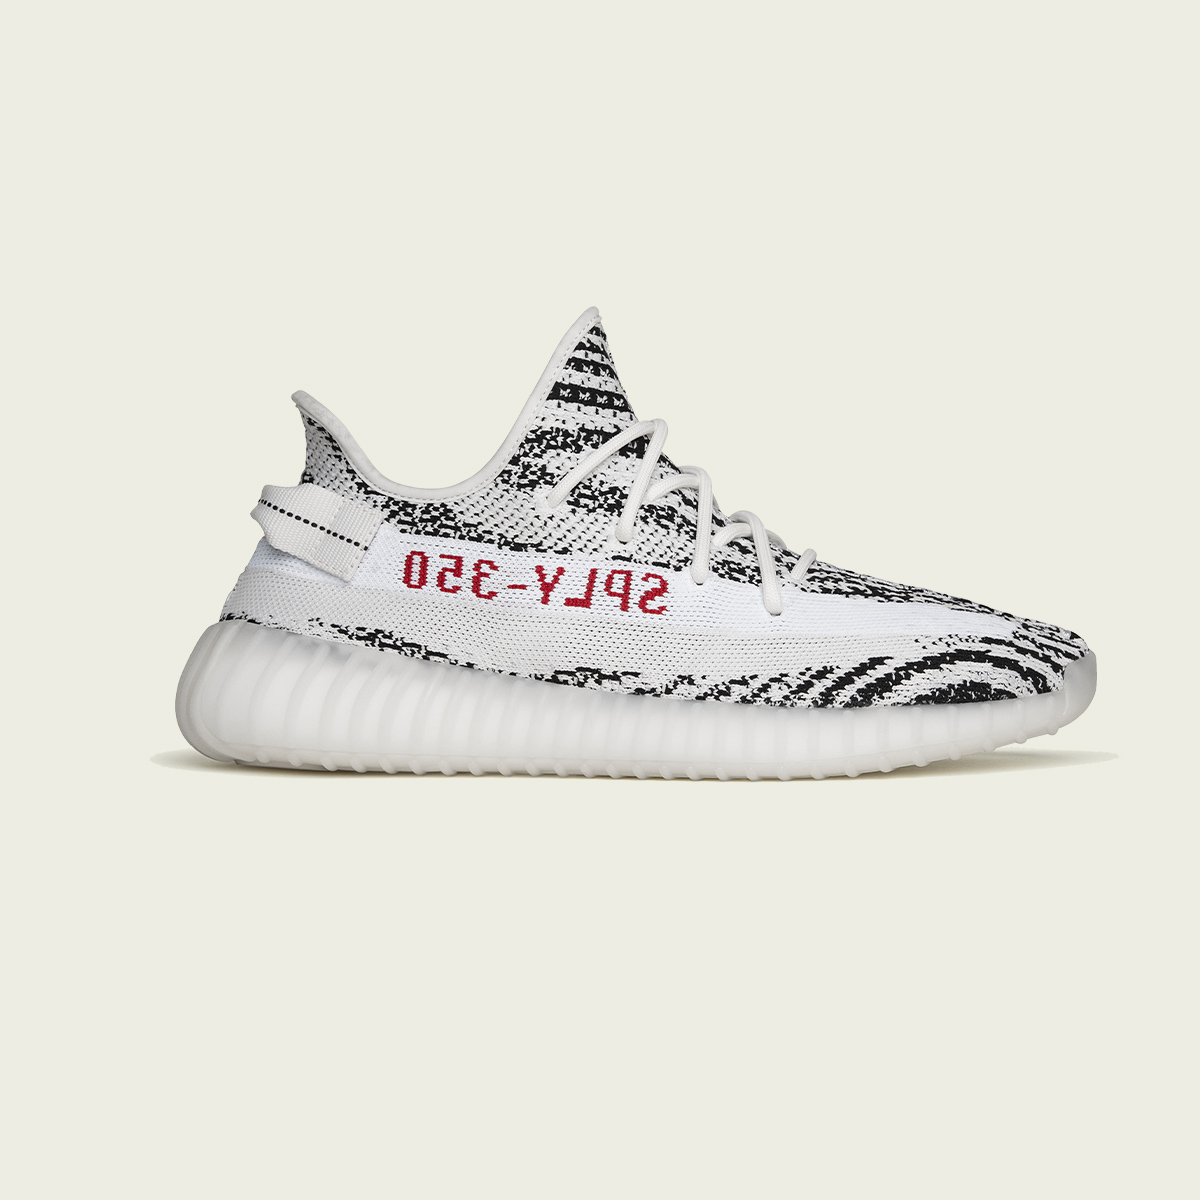 Foot Locker on X: "#YEEZY BOOST 350 V2 'ZEBRA' LAUNCHES APRIL 9TH IN MEN'S  SIZES. Reservations are now open via the Foot Locker App.  https://t.co/Ic42omPHXP" / X